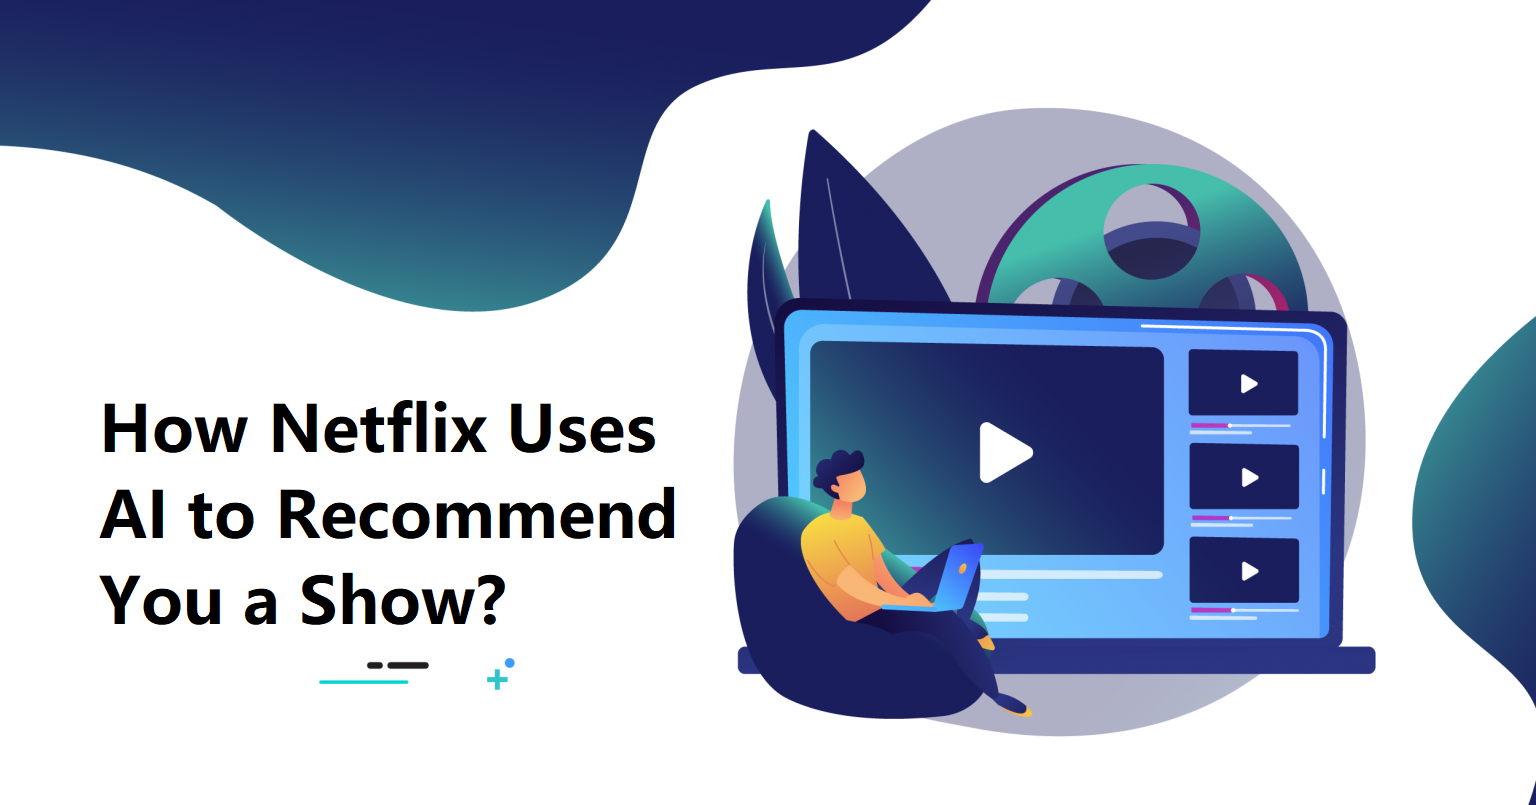 How Netflix Uses AI to Recommend You a Show